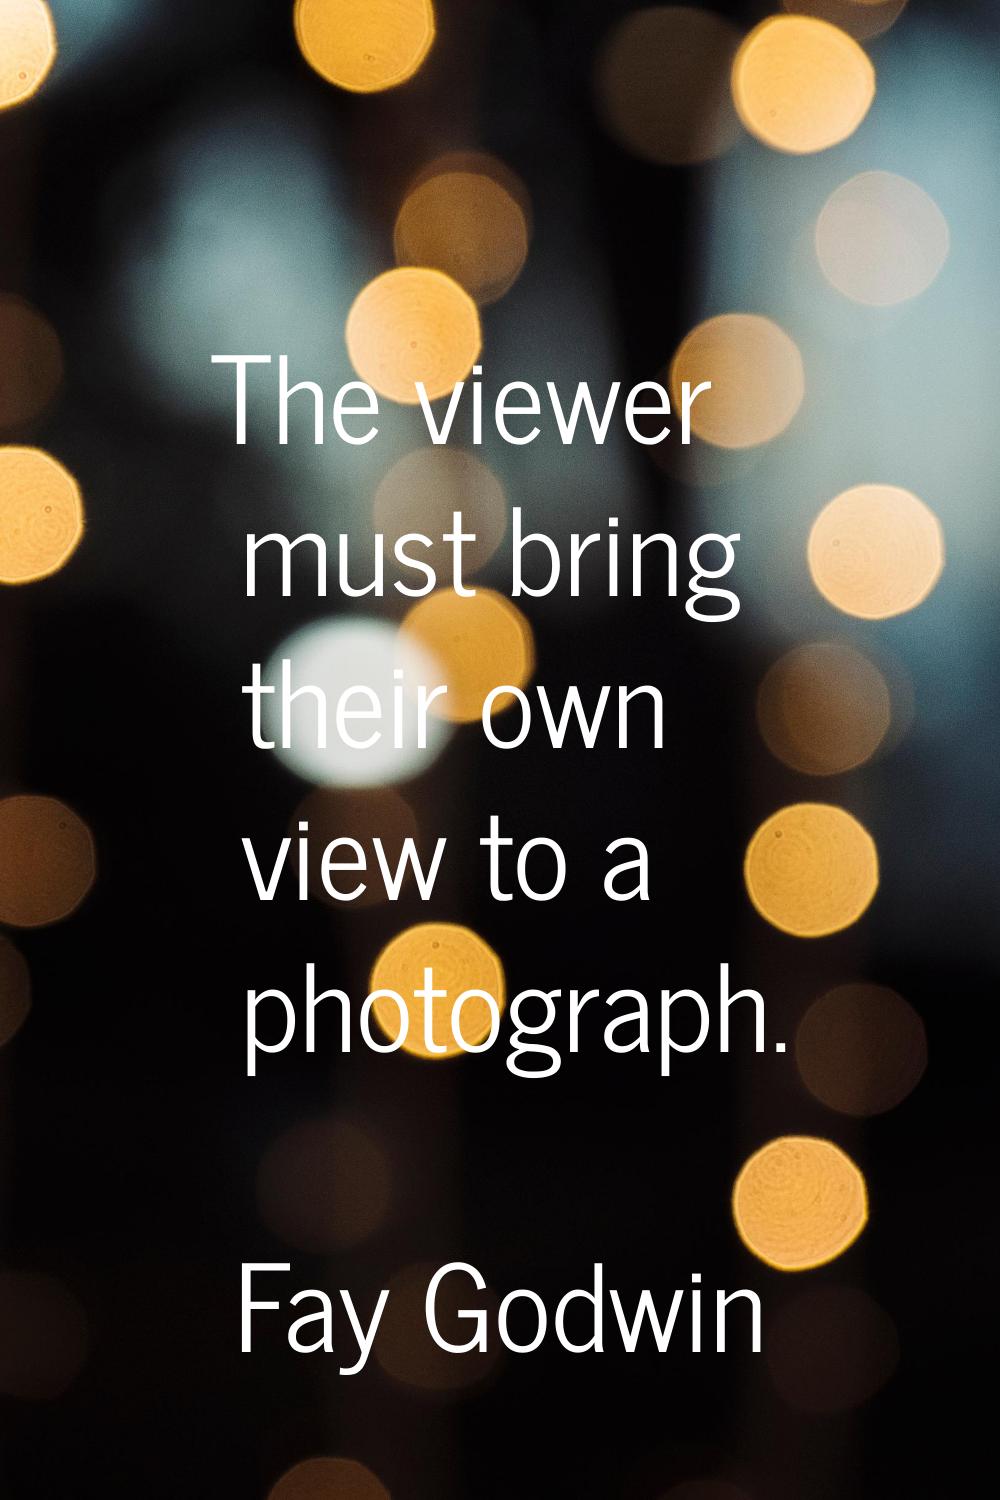 The viewer must bring their own view to a photograph.